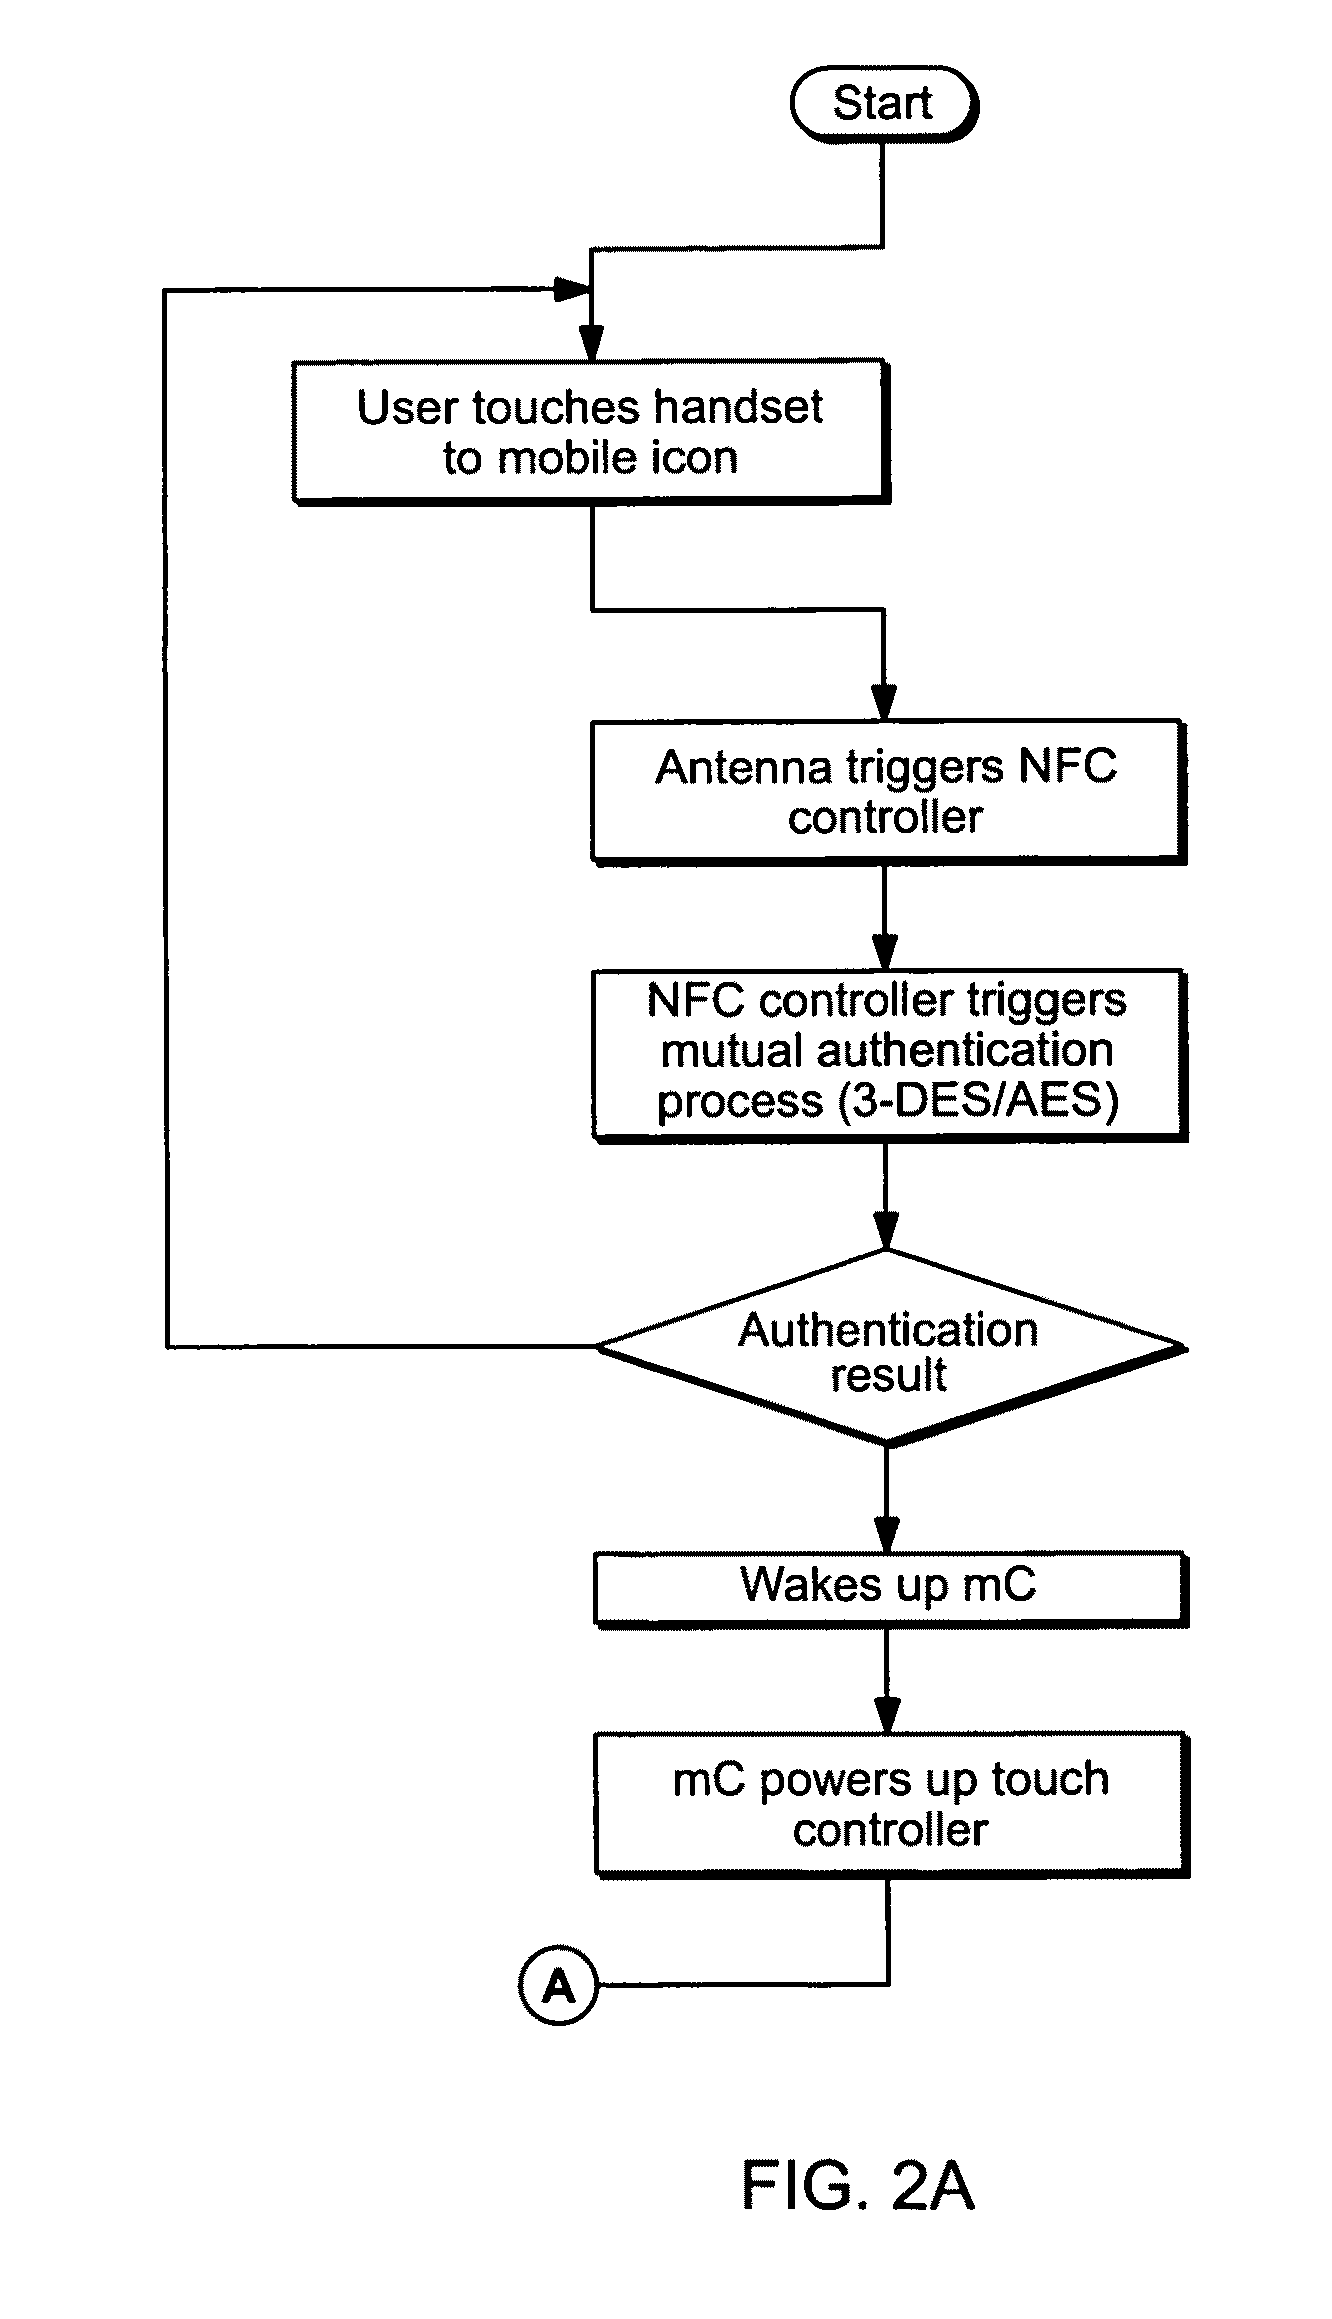 Integrated System and Method for Enabling Mobile Commerce Transactions using "Contactless Identity Modules in Mobile Handsets"